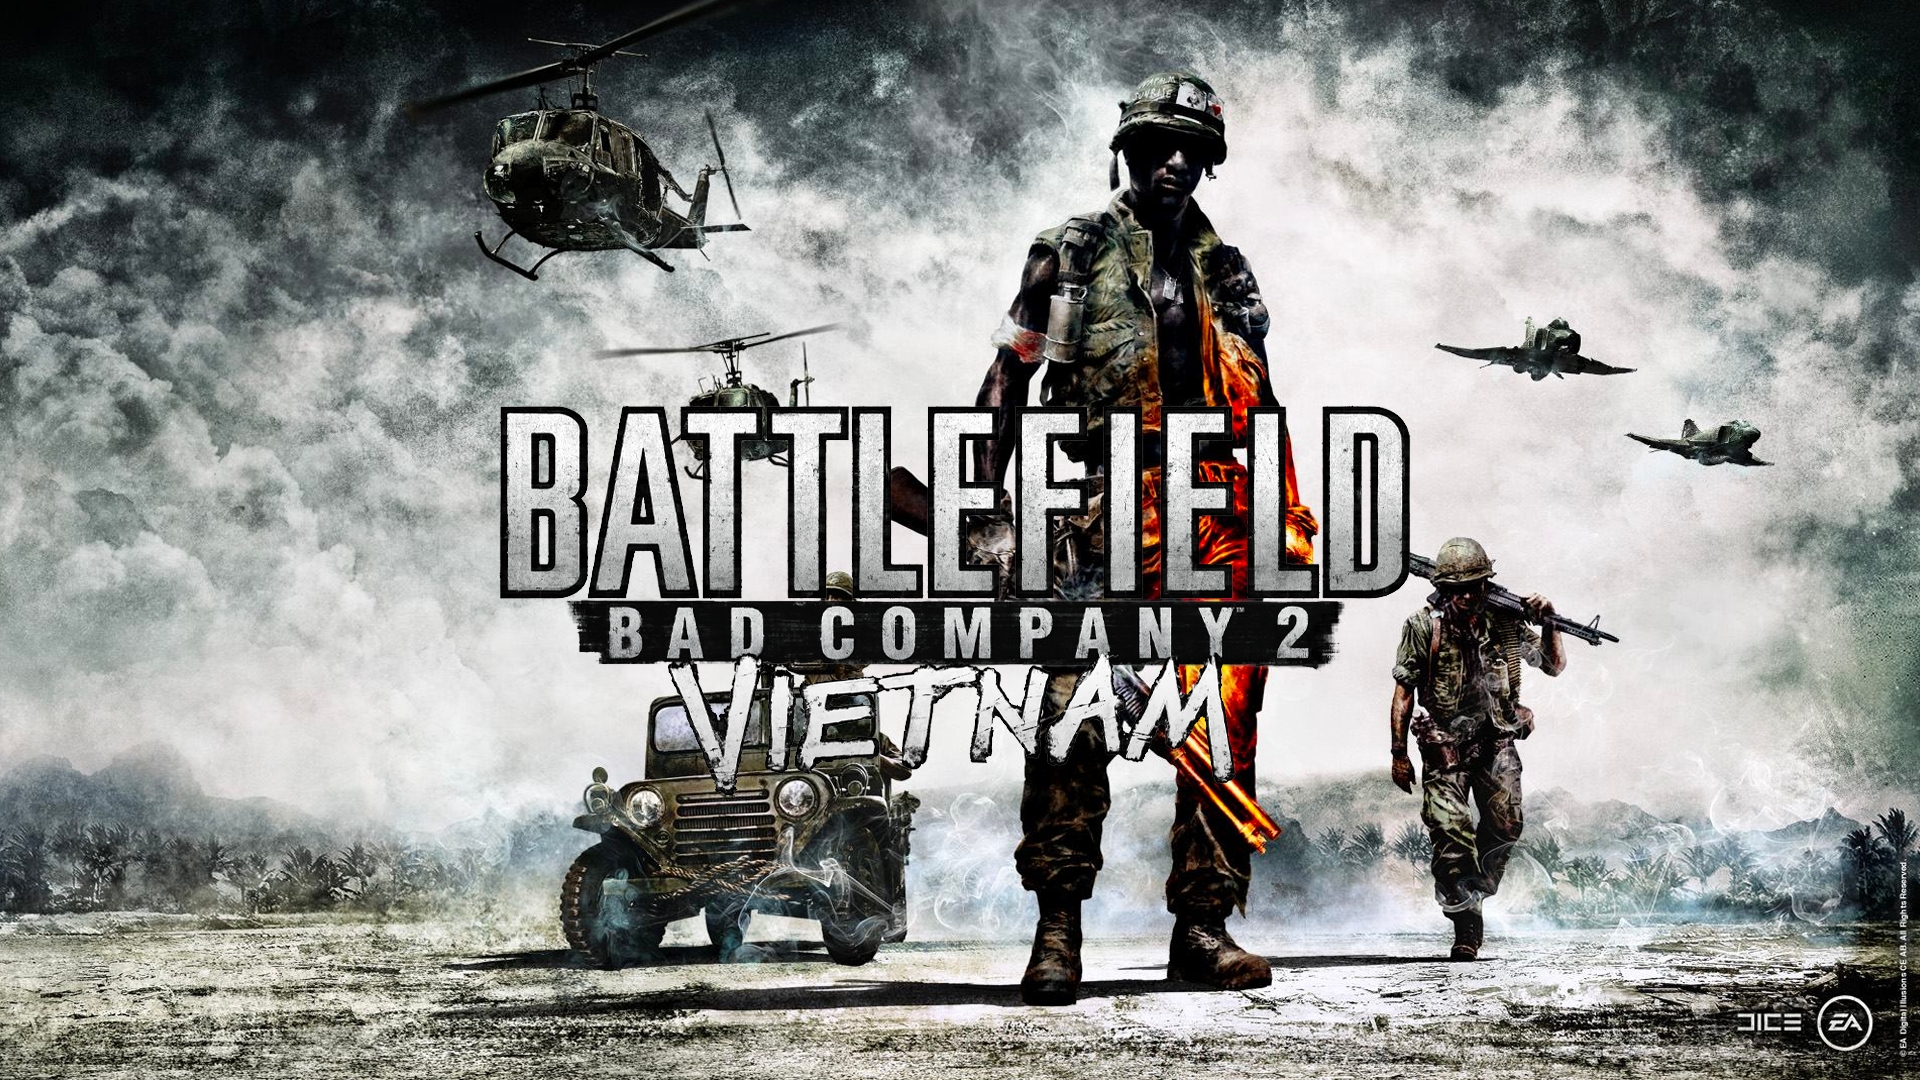 can you still play battlefield bad company 2 online?